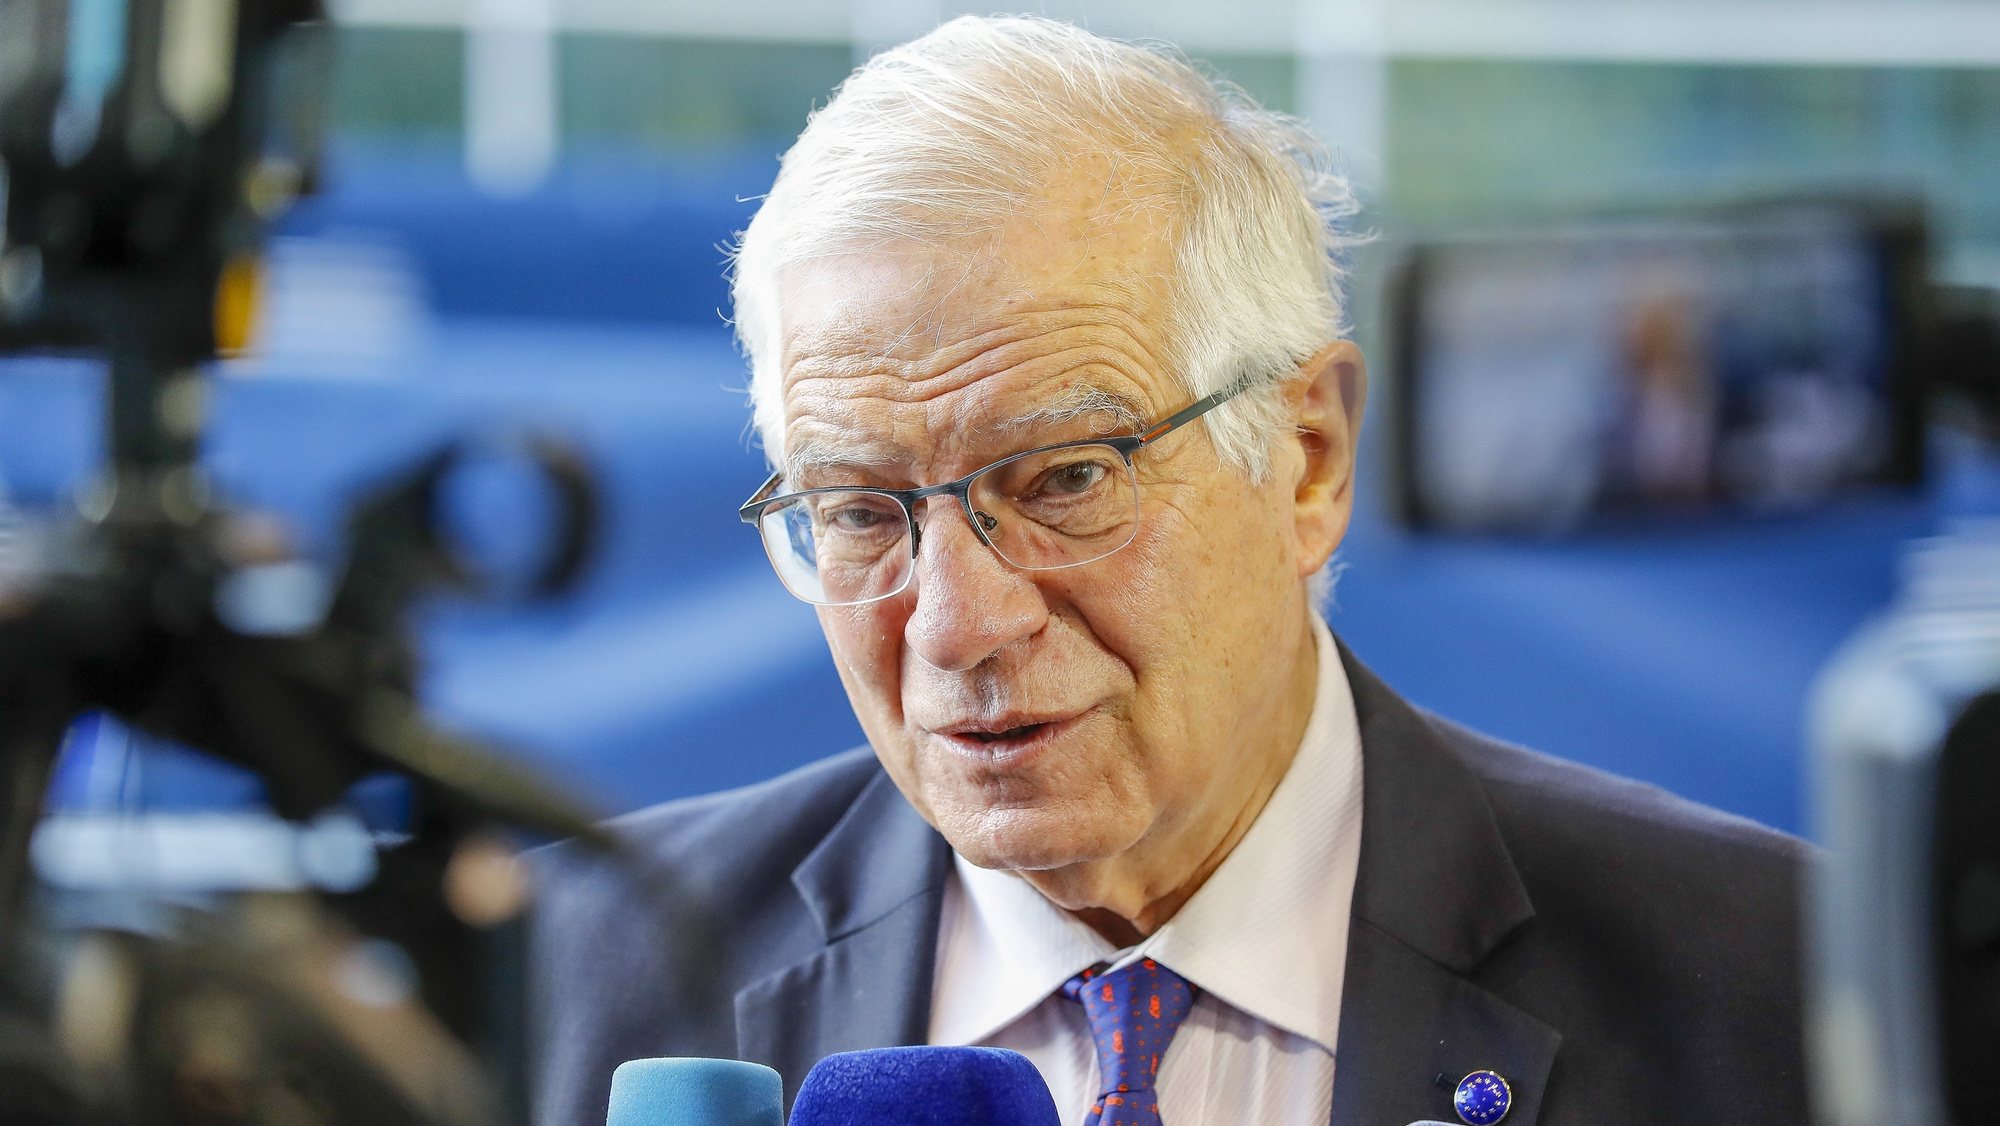 epa09529674 High Representative of the Union for Foreign Affairs and Security Policy, Vice President of the European Commission Josep Borrell speaks to the media prior to a EU Foreign Affairs Council meeting in Luxembourg, 18 October 2021. The Council will discuss the EU&#039;s approach to the Gulf region, EU relations with the Eastern Partnership (EaP), as well as on Ethiopia, focusing on humanitarian aspects in light of the latest developments in the country, and on the upcoming general elections in Nicaragua,  EPA/JULIEN WARNAND